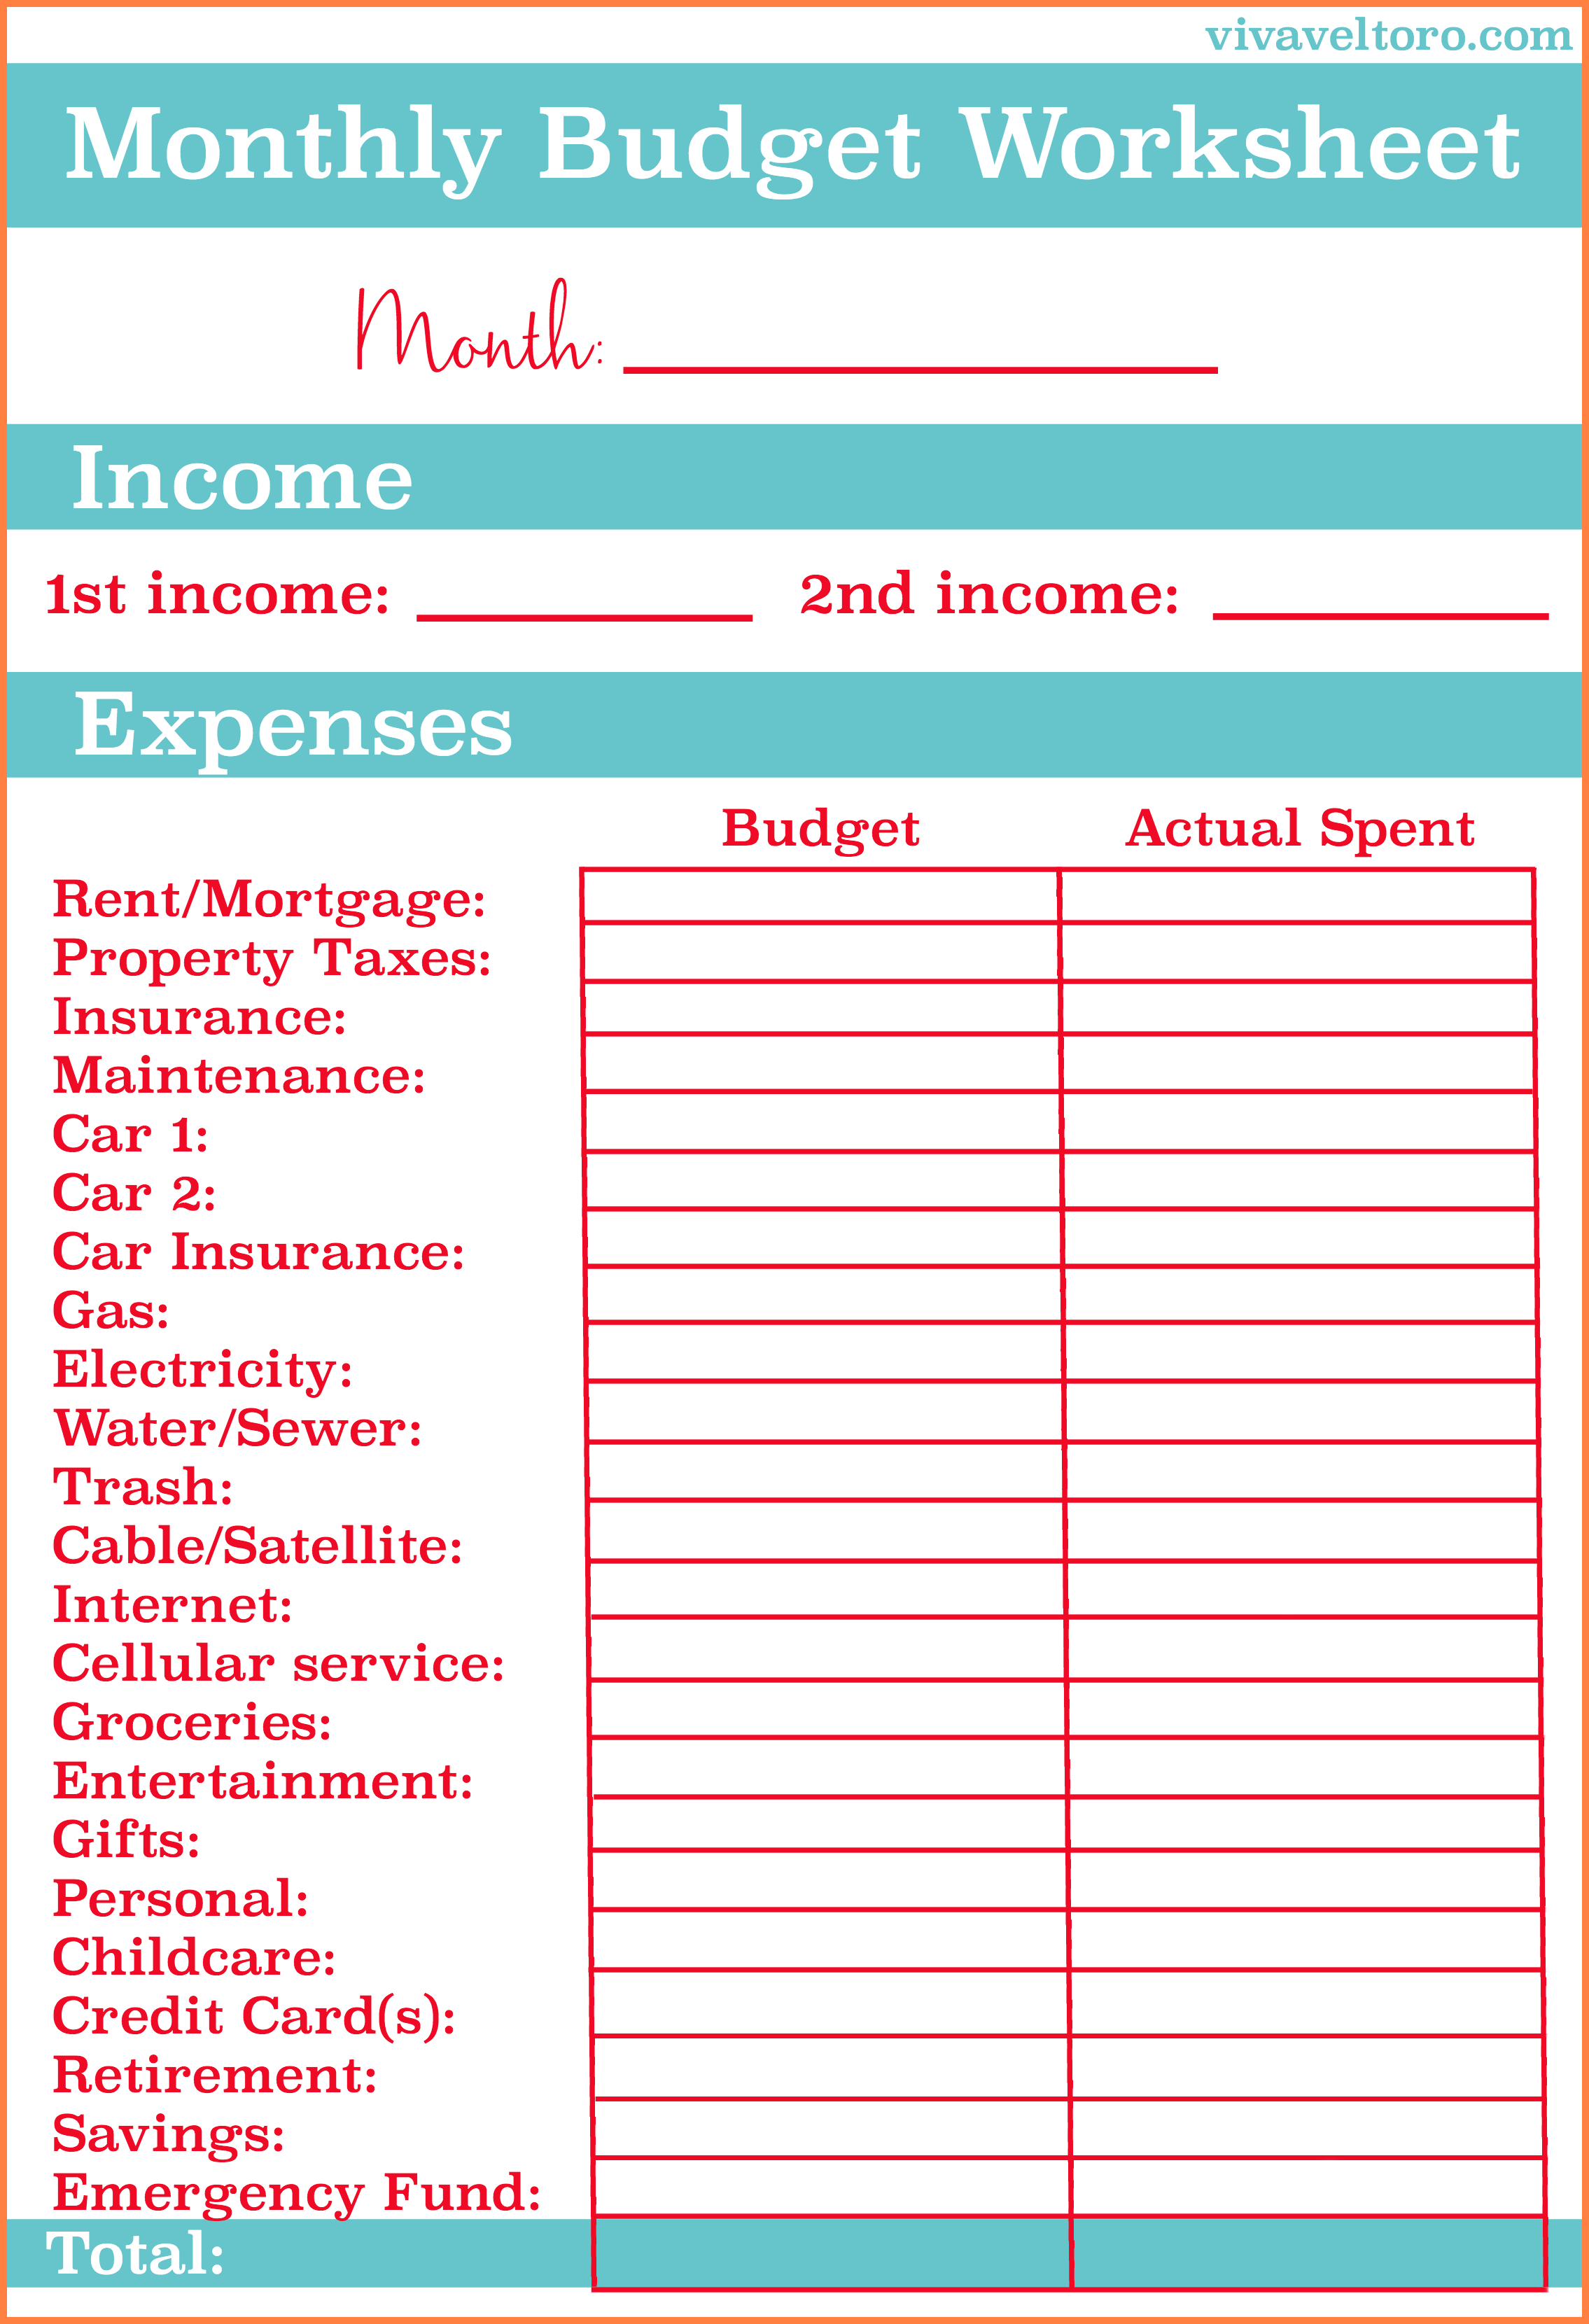 3-monthly-budget-form-templates-printable-in-pdf-printerfriendly